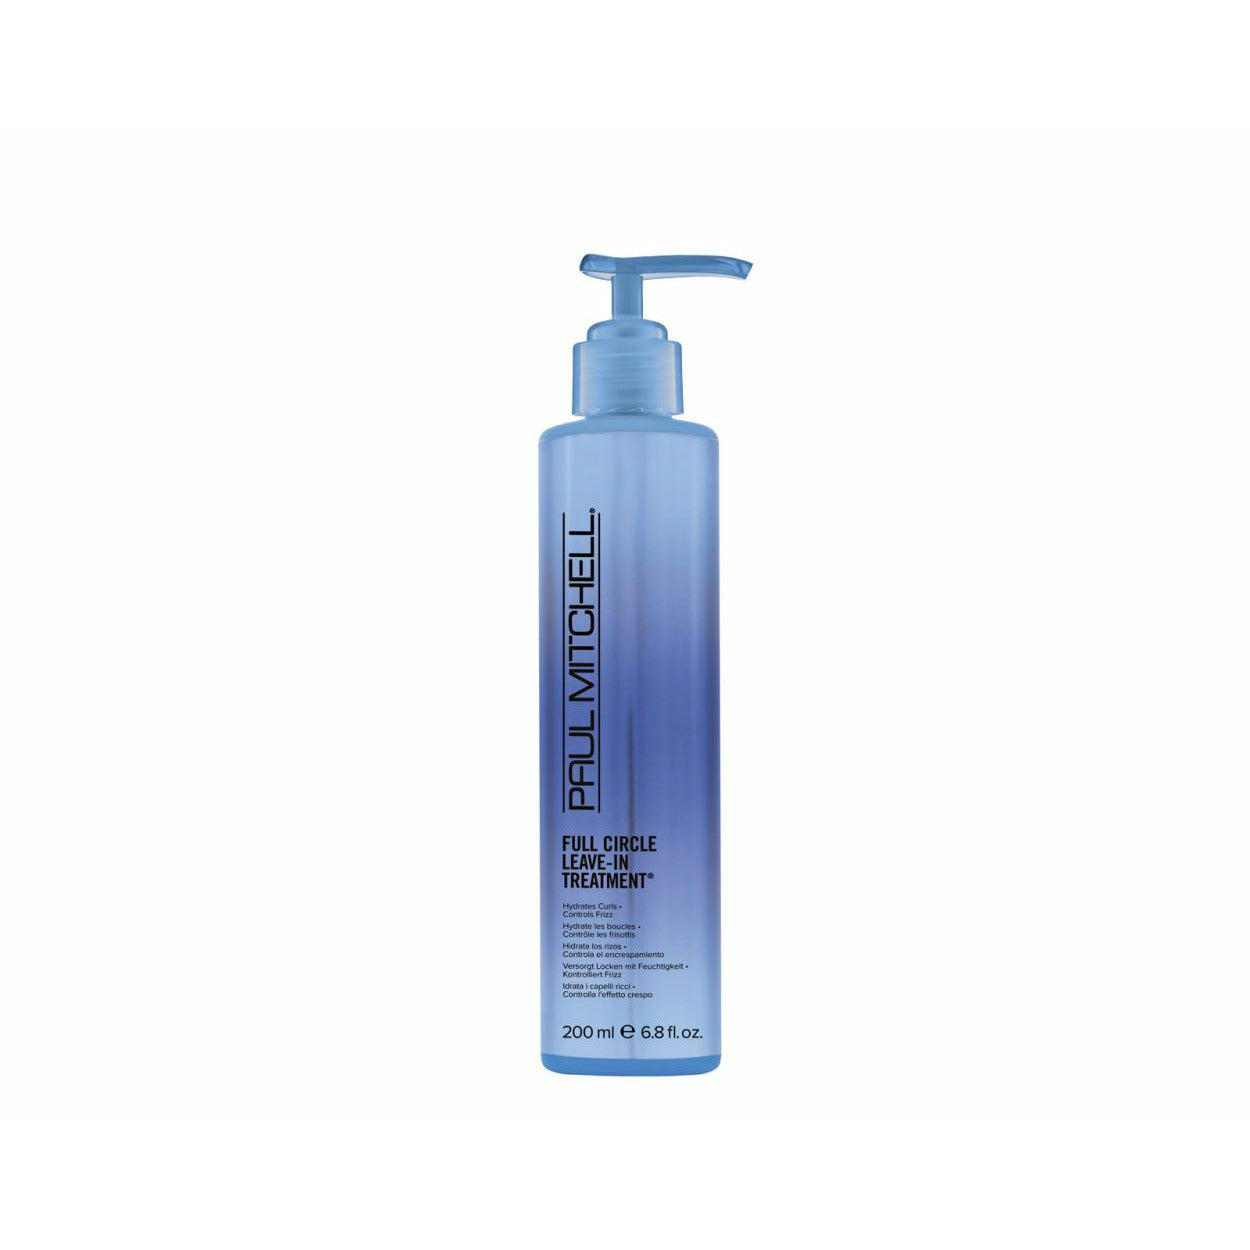 Paul Mitchell Curls Full Circle Leave In Treatment